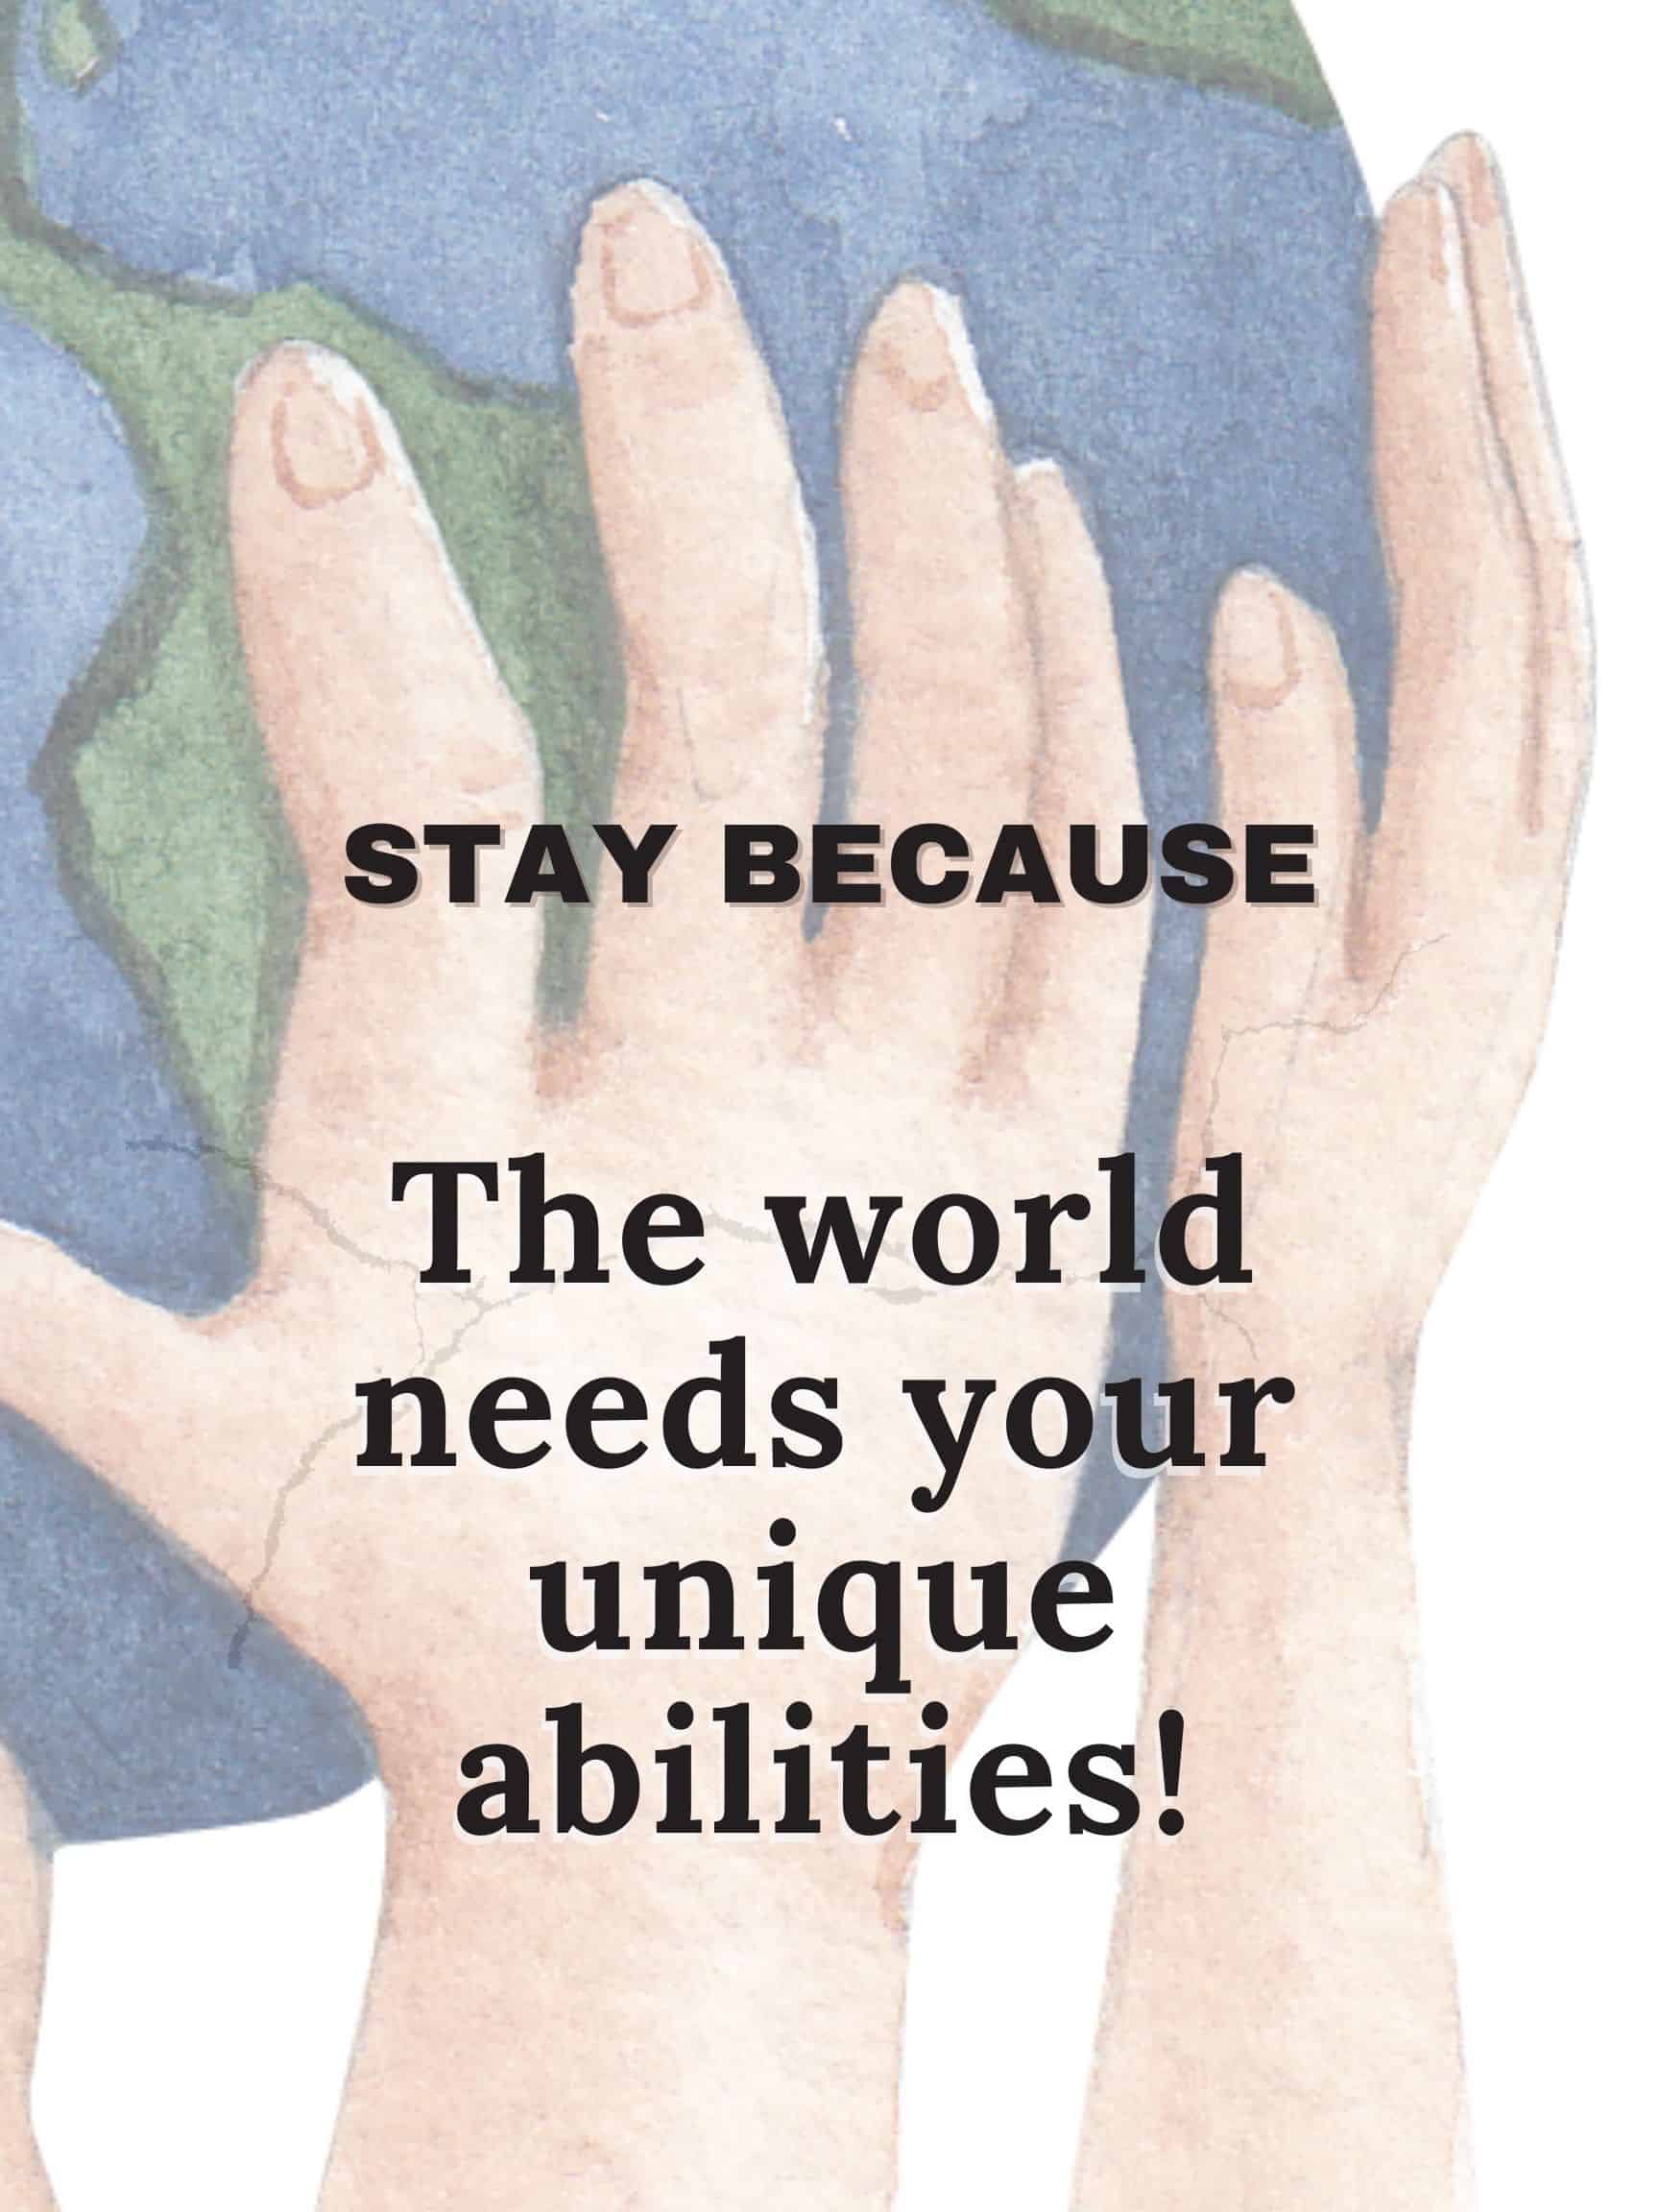 Stay because the world needs your unique abilities #StayBecause